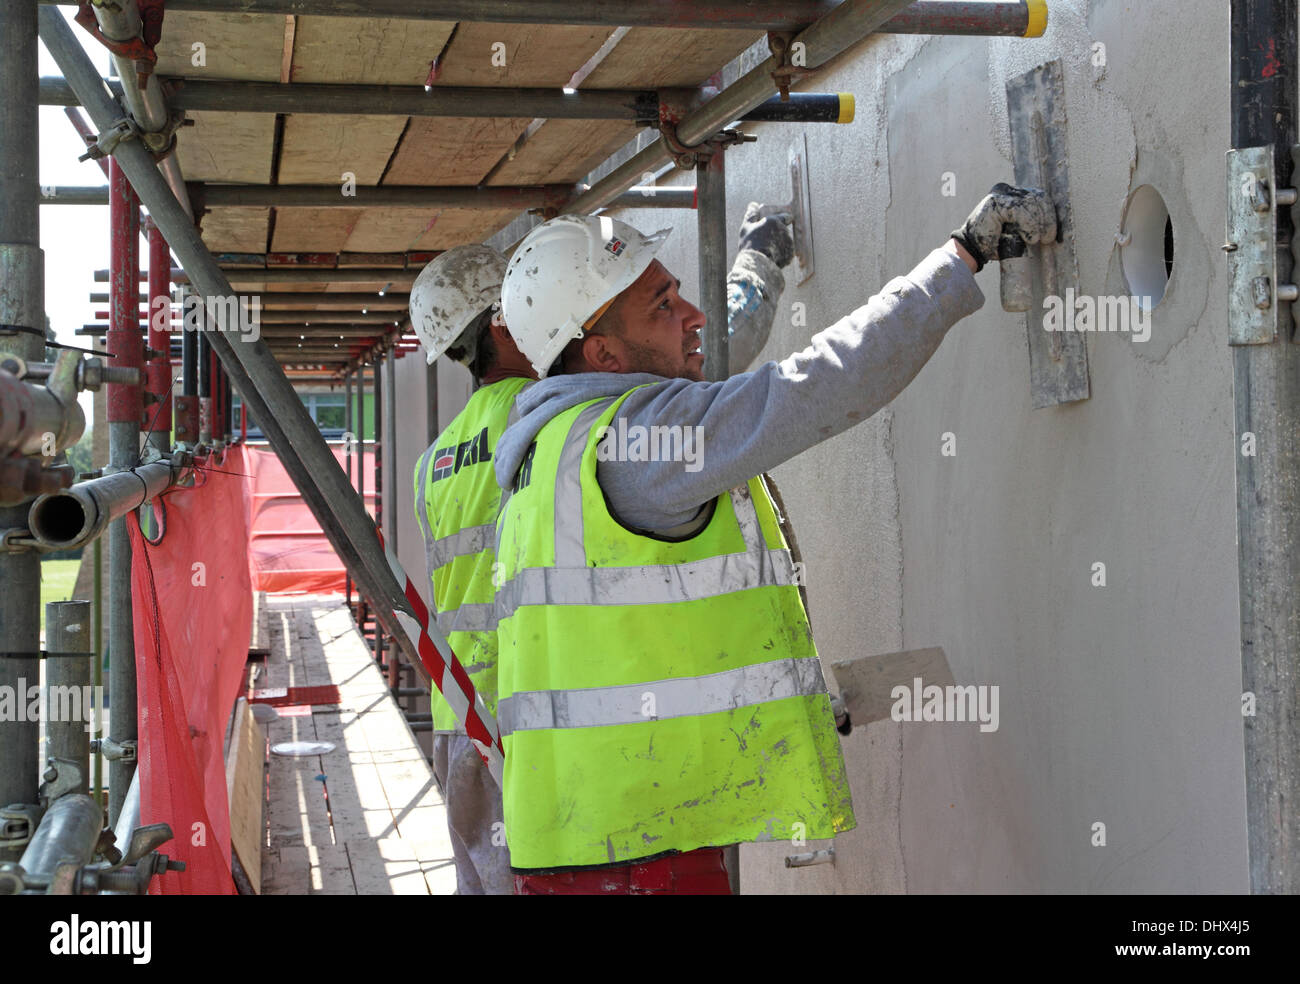 Two workmen apply concrete render to the exterior of public housing as part of refurbishment work including thermal overcladding Stock Photo